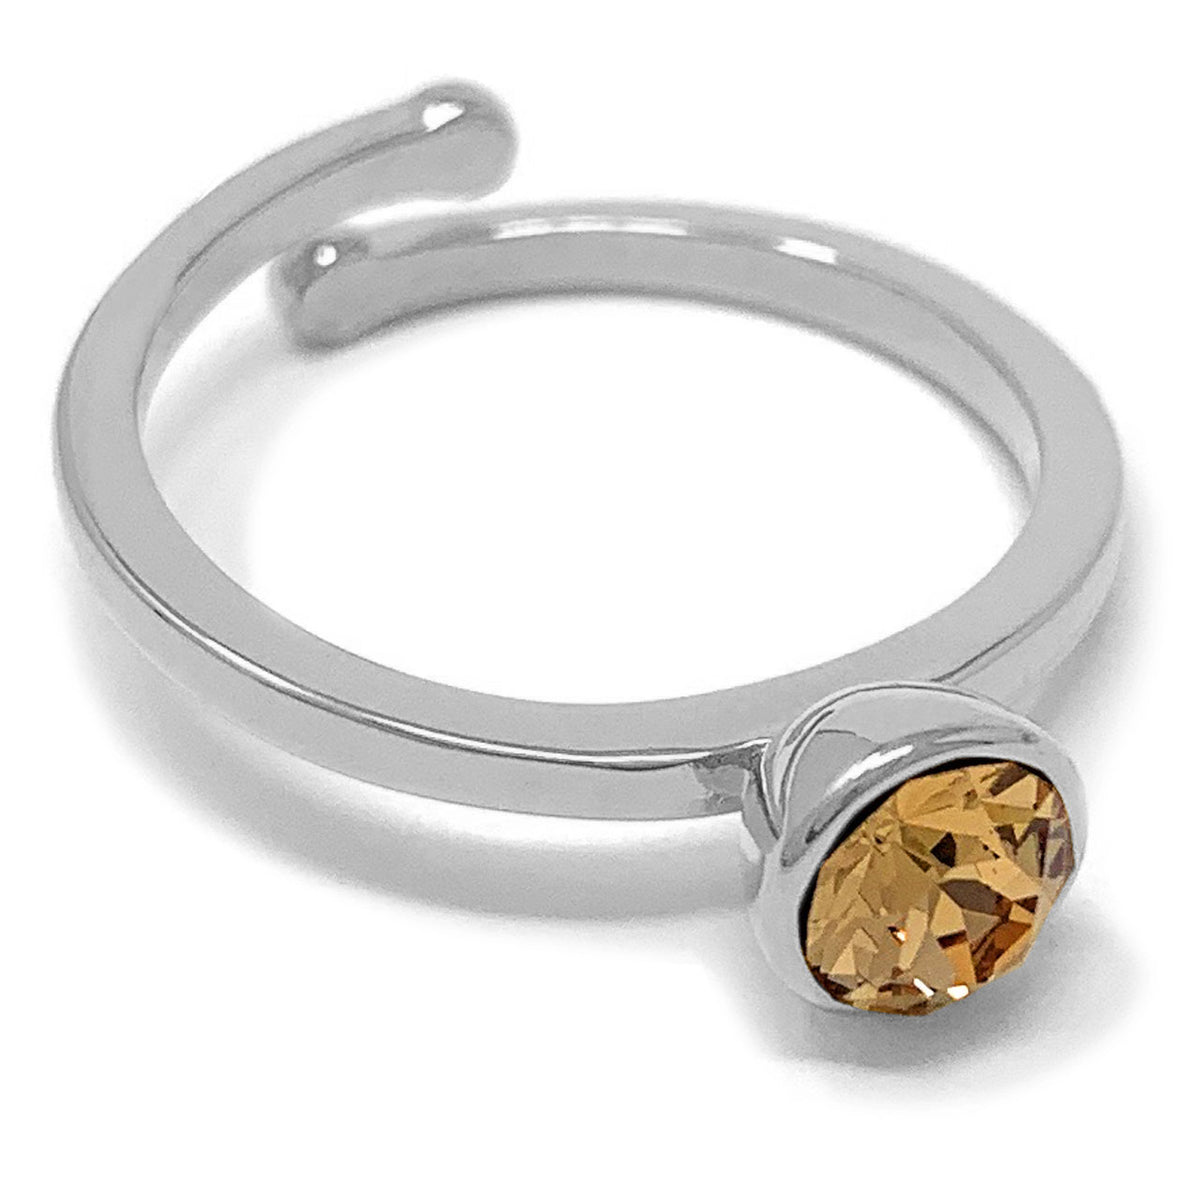 Harley Adjustable Ring with Yellow Brown Light Topaz Round Crystals from Swarovski Silver Toned Rhodium Plated - Ed Heart